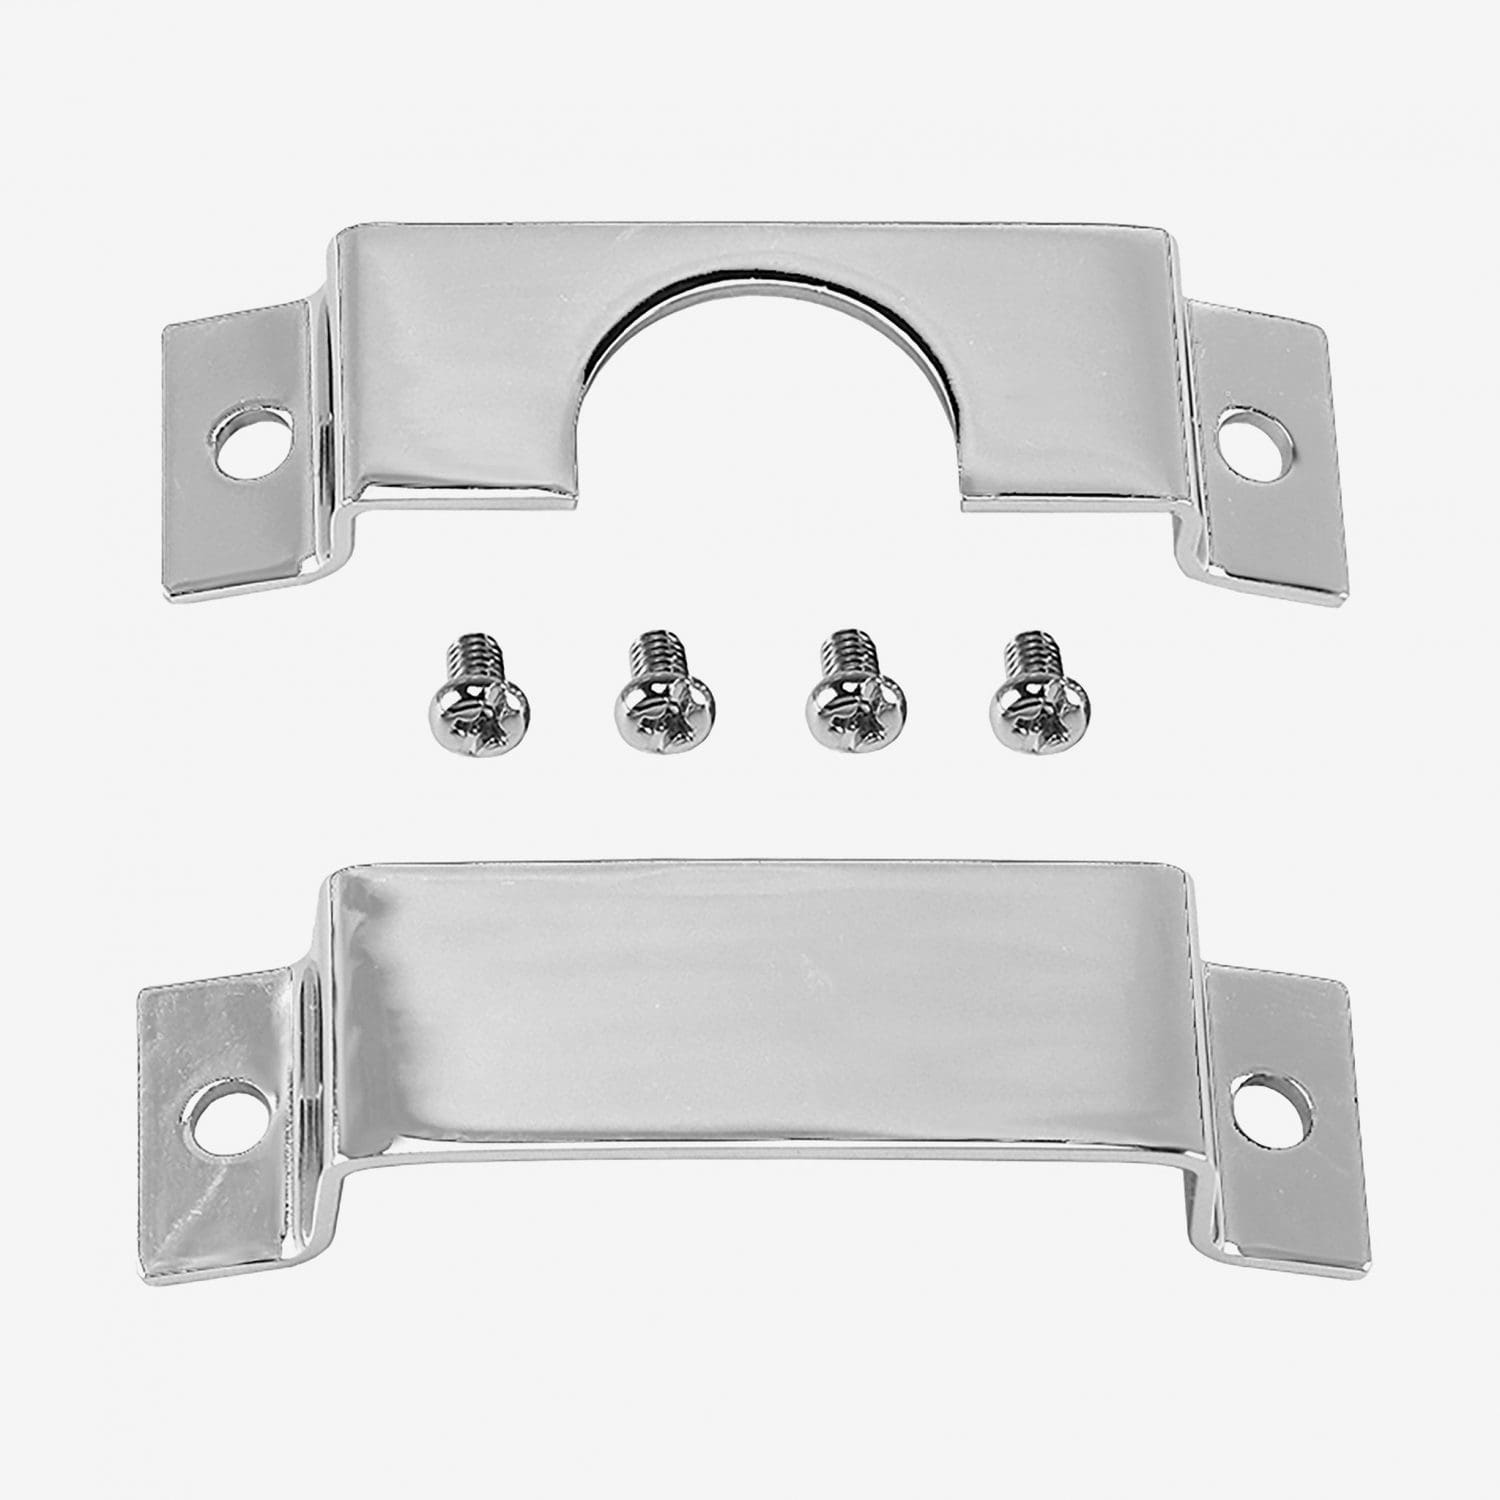 Dyna-sonic Snare Rail Hoop Guards